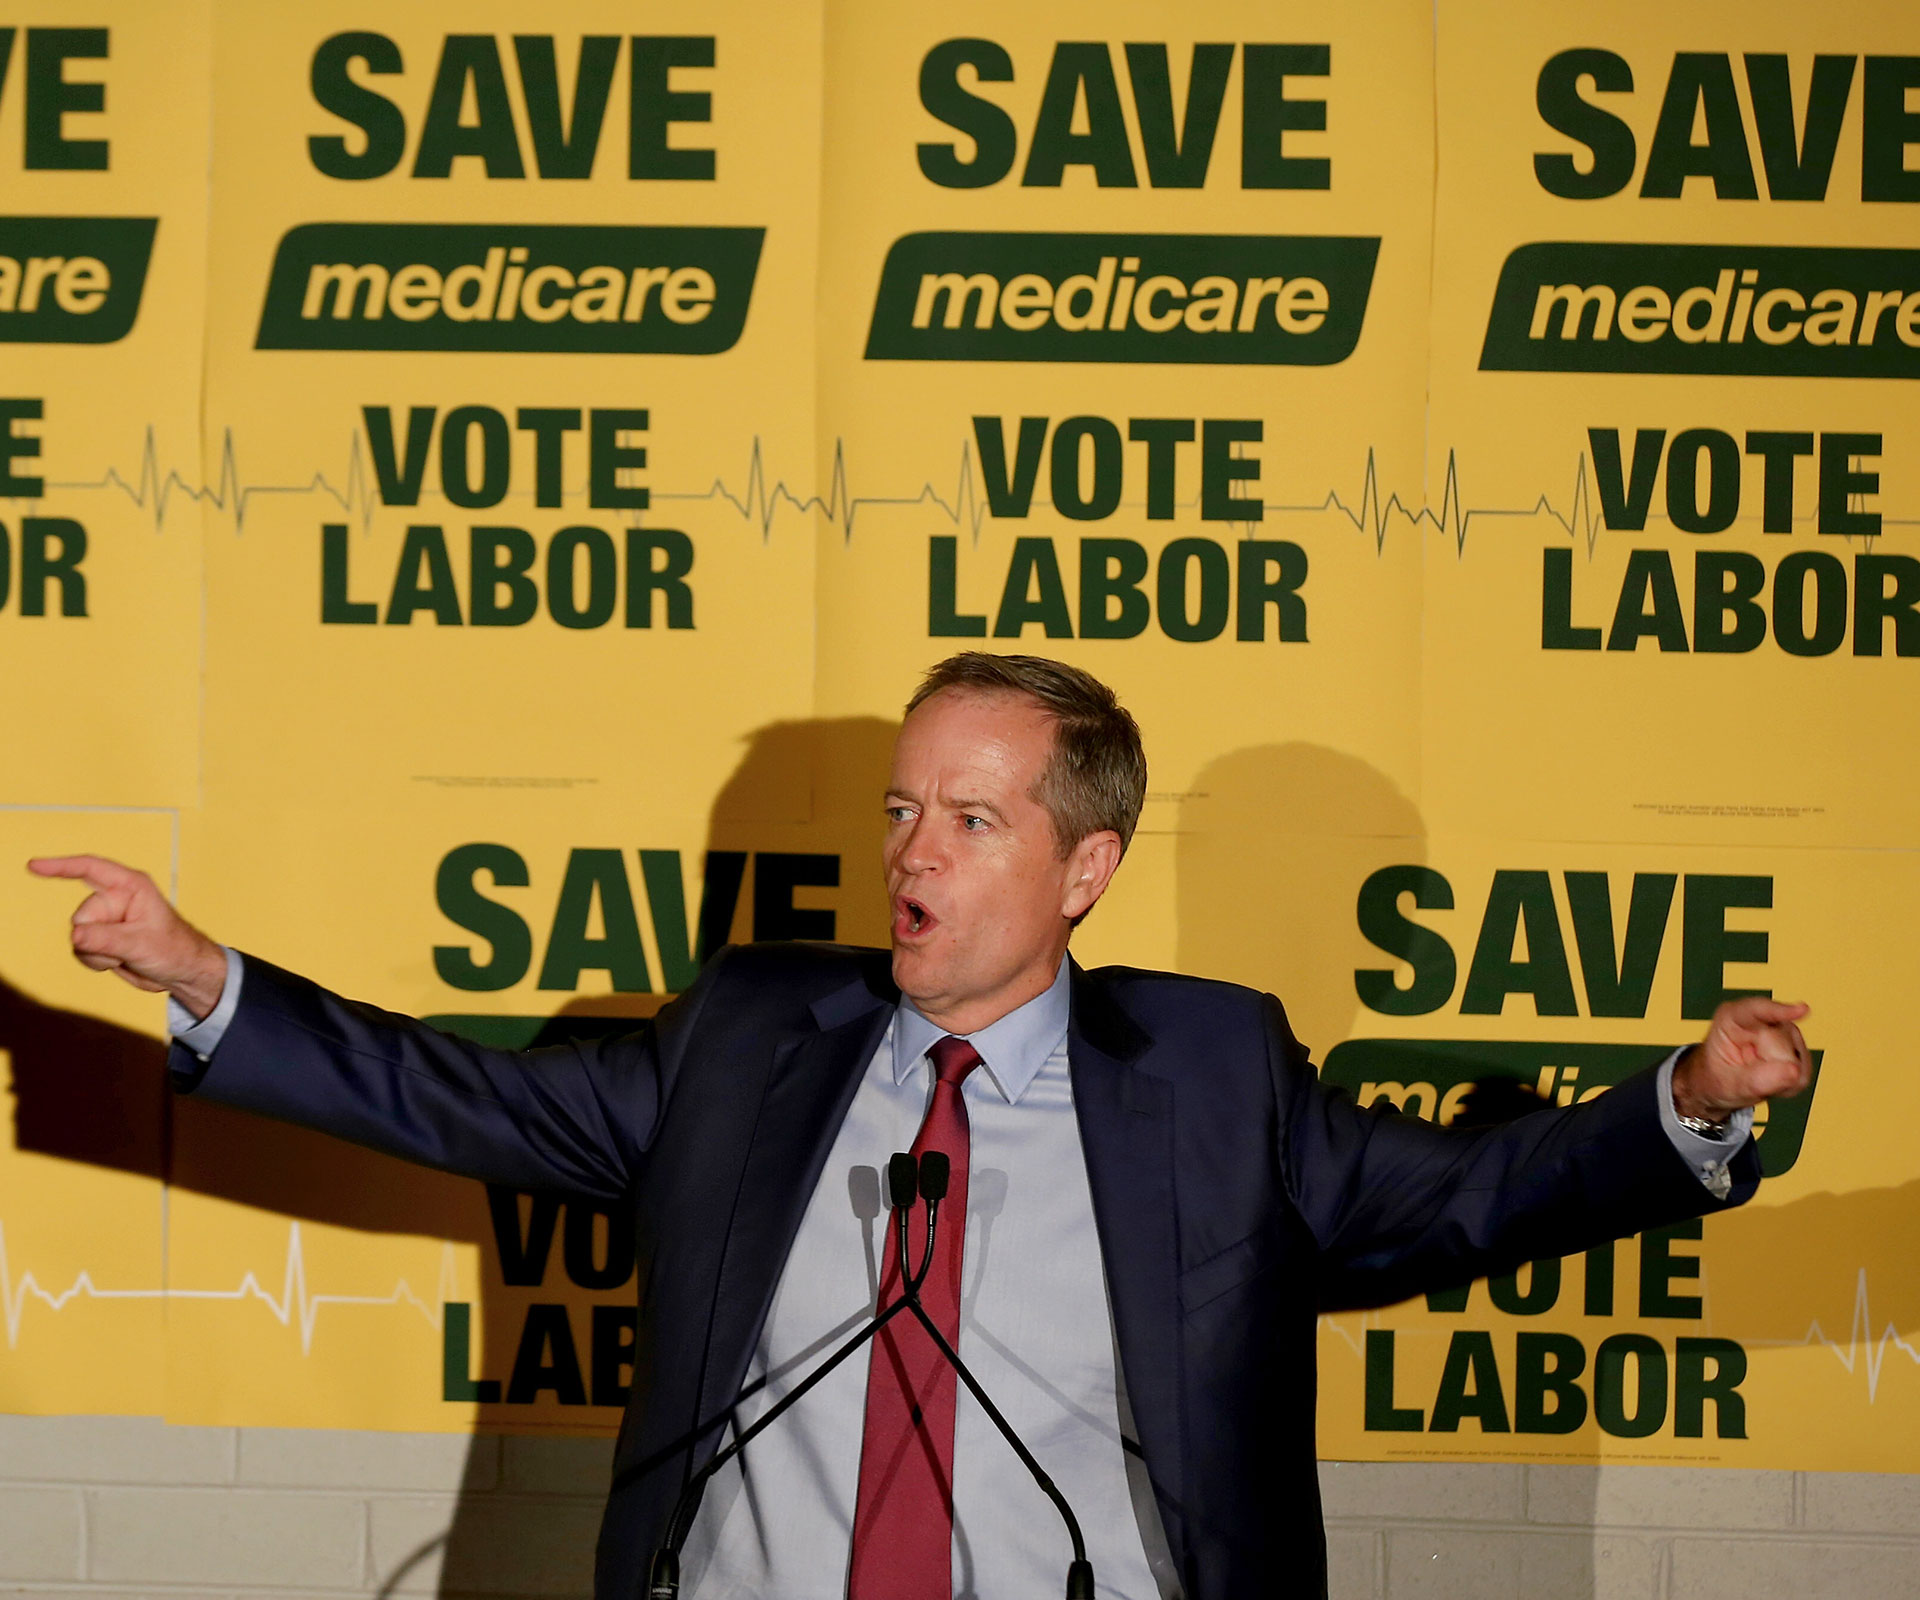 Is Medicare really under threat?